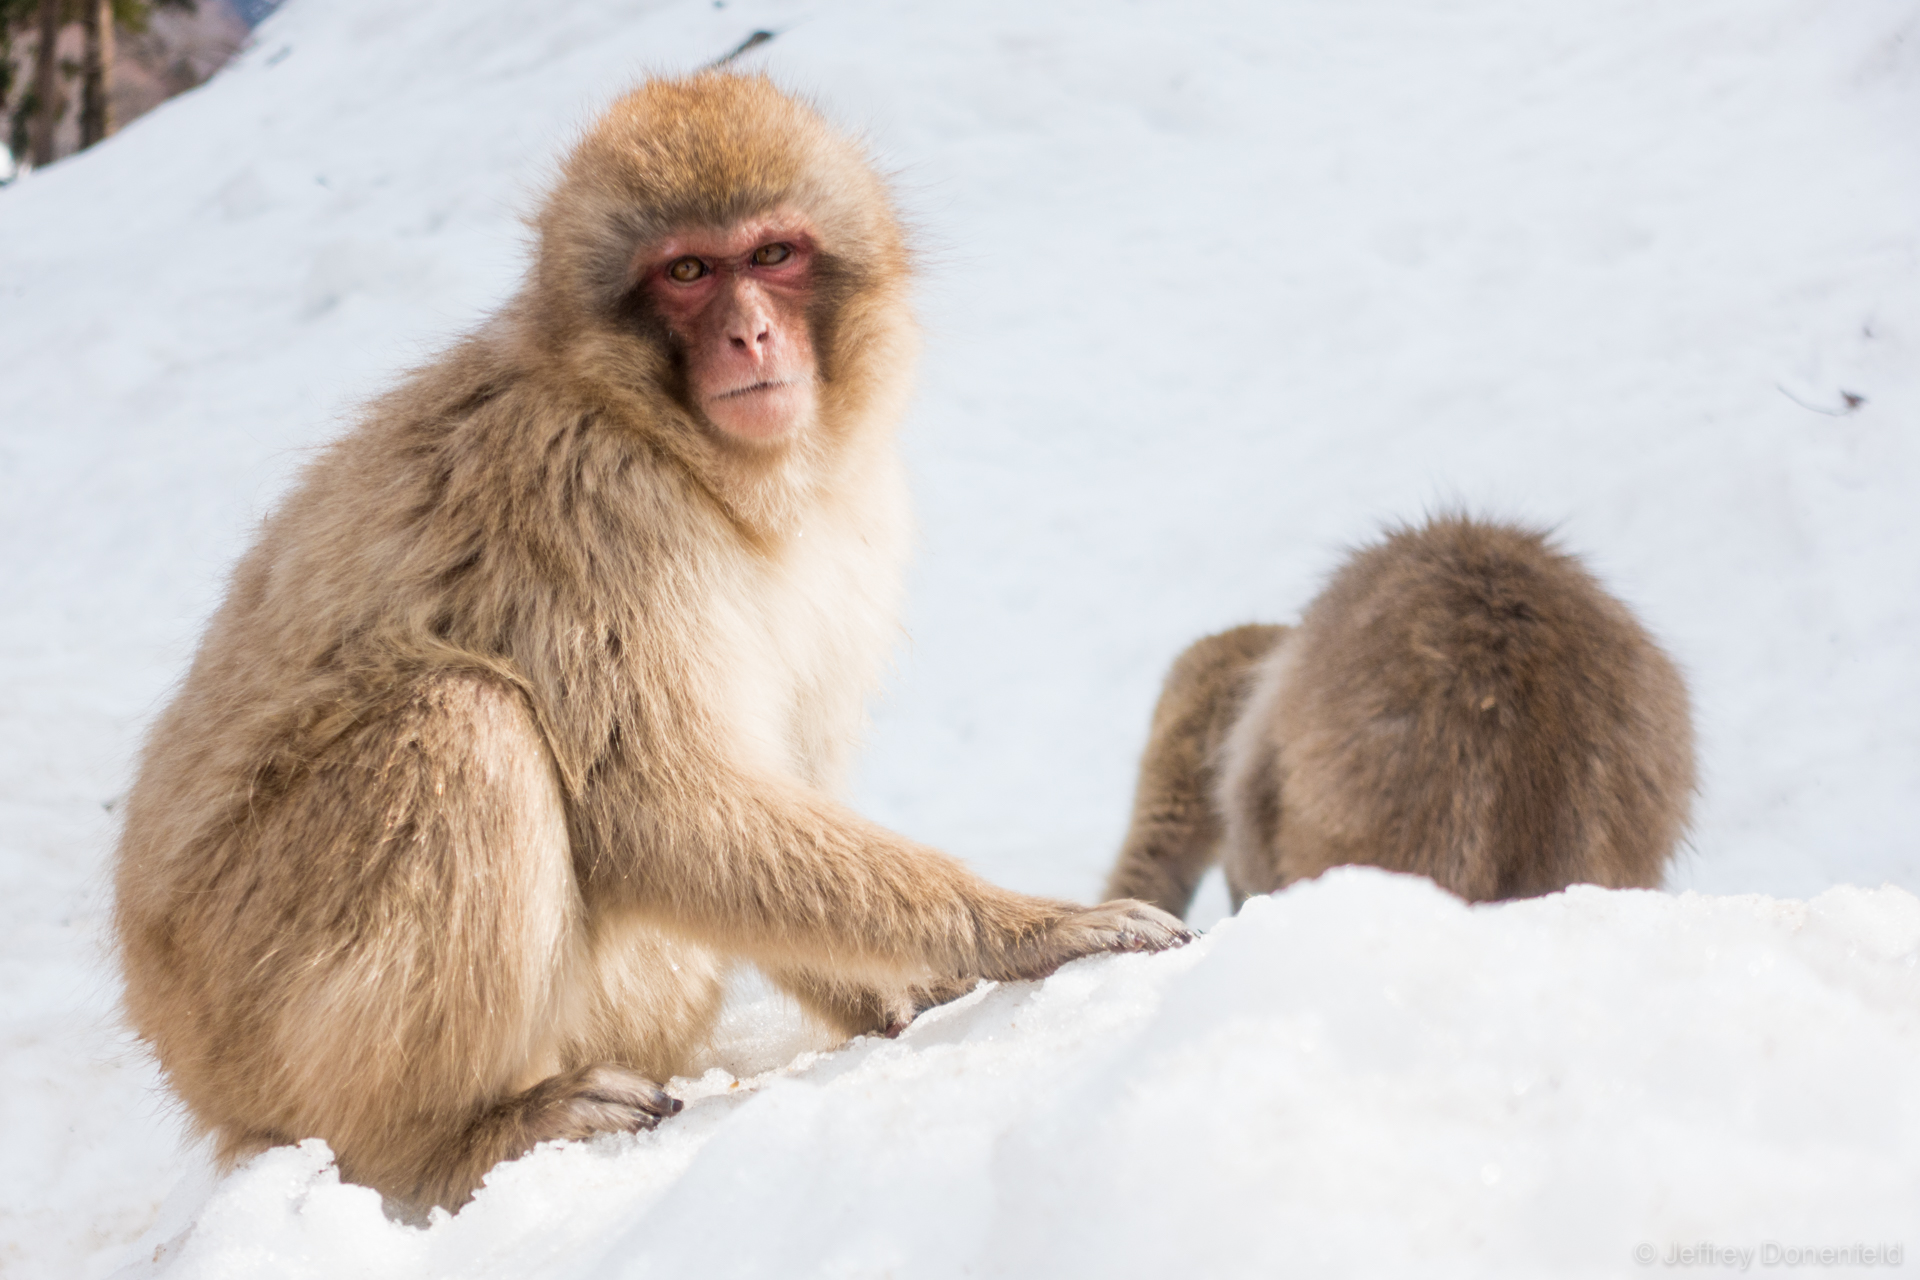 Macaque Snow Monkeys relaxing in the snow.